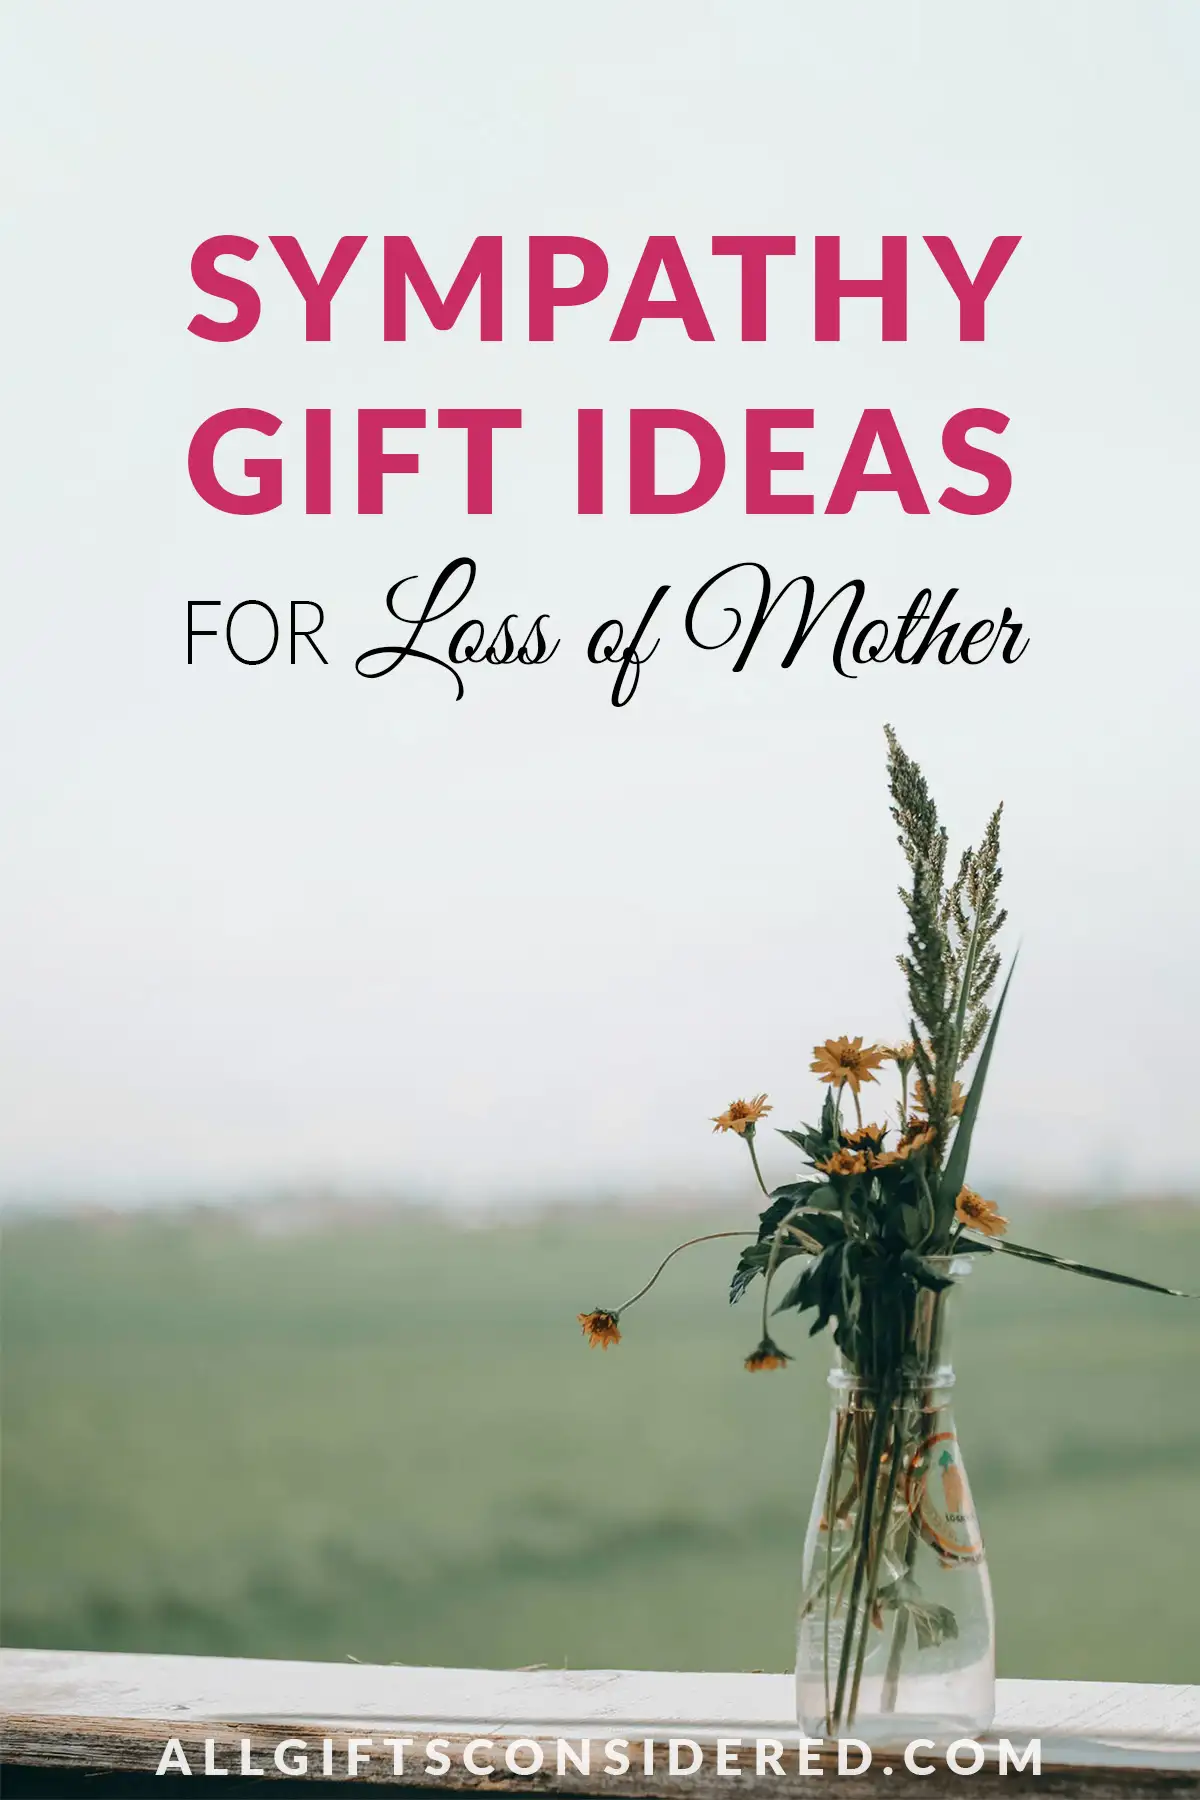 sympathy gift ideas for loss of mother - feature image